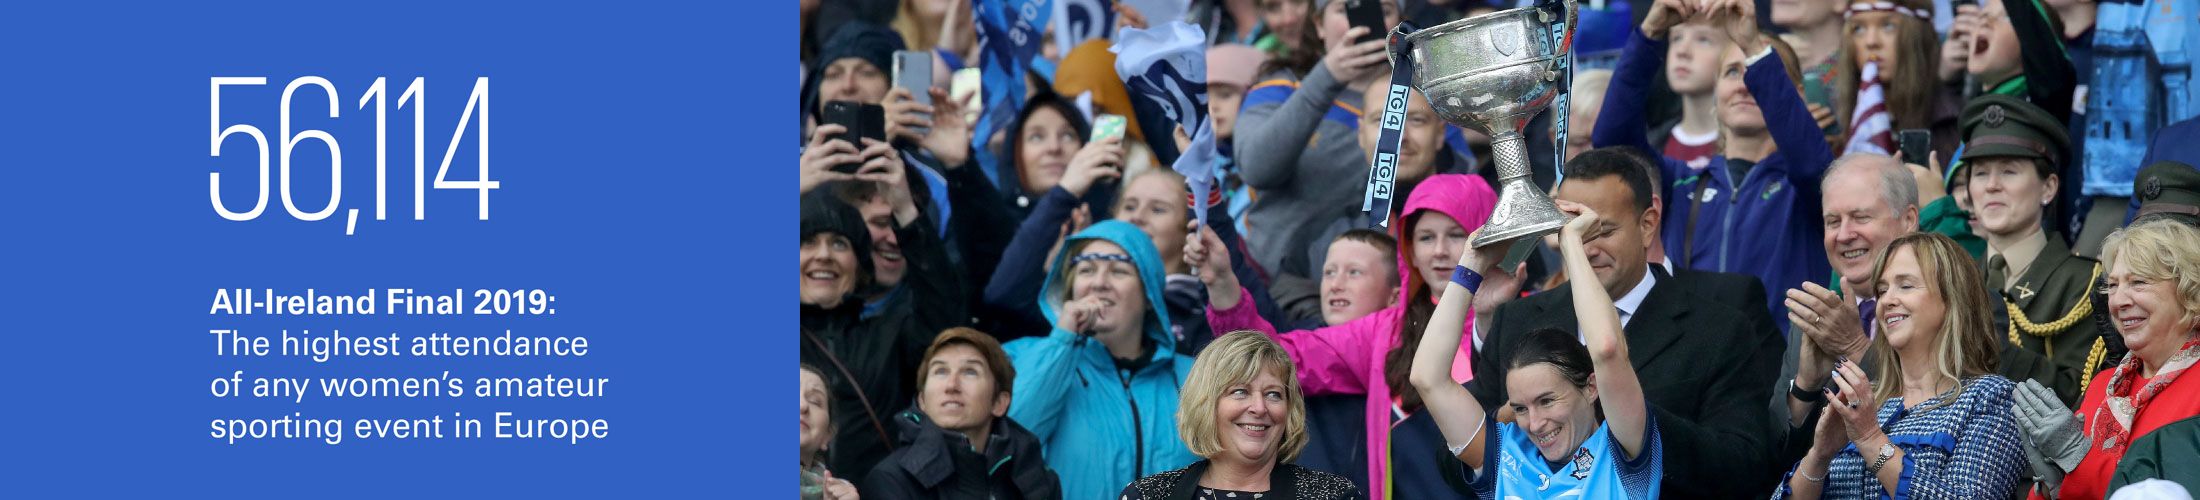 56,114 - All-Ireland Final 2019: The highest attendacne of any women's amateur sporting event in Europe